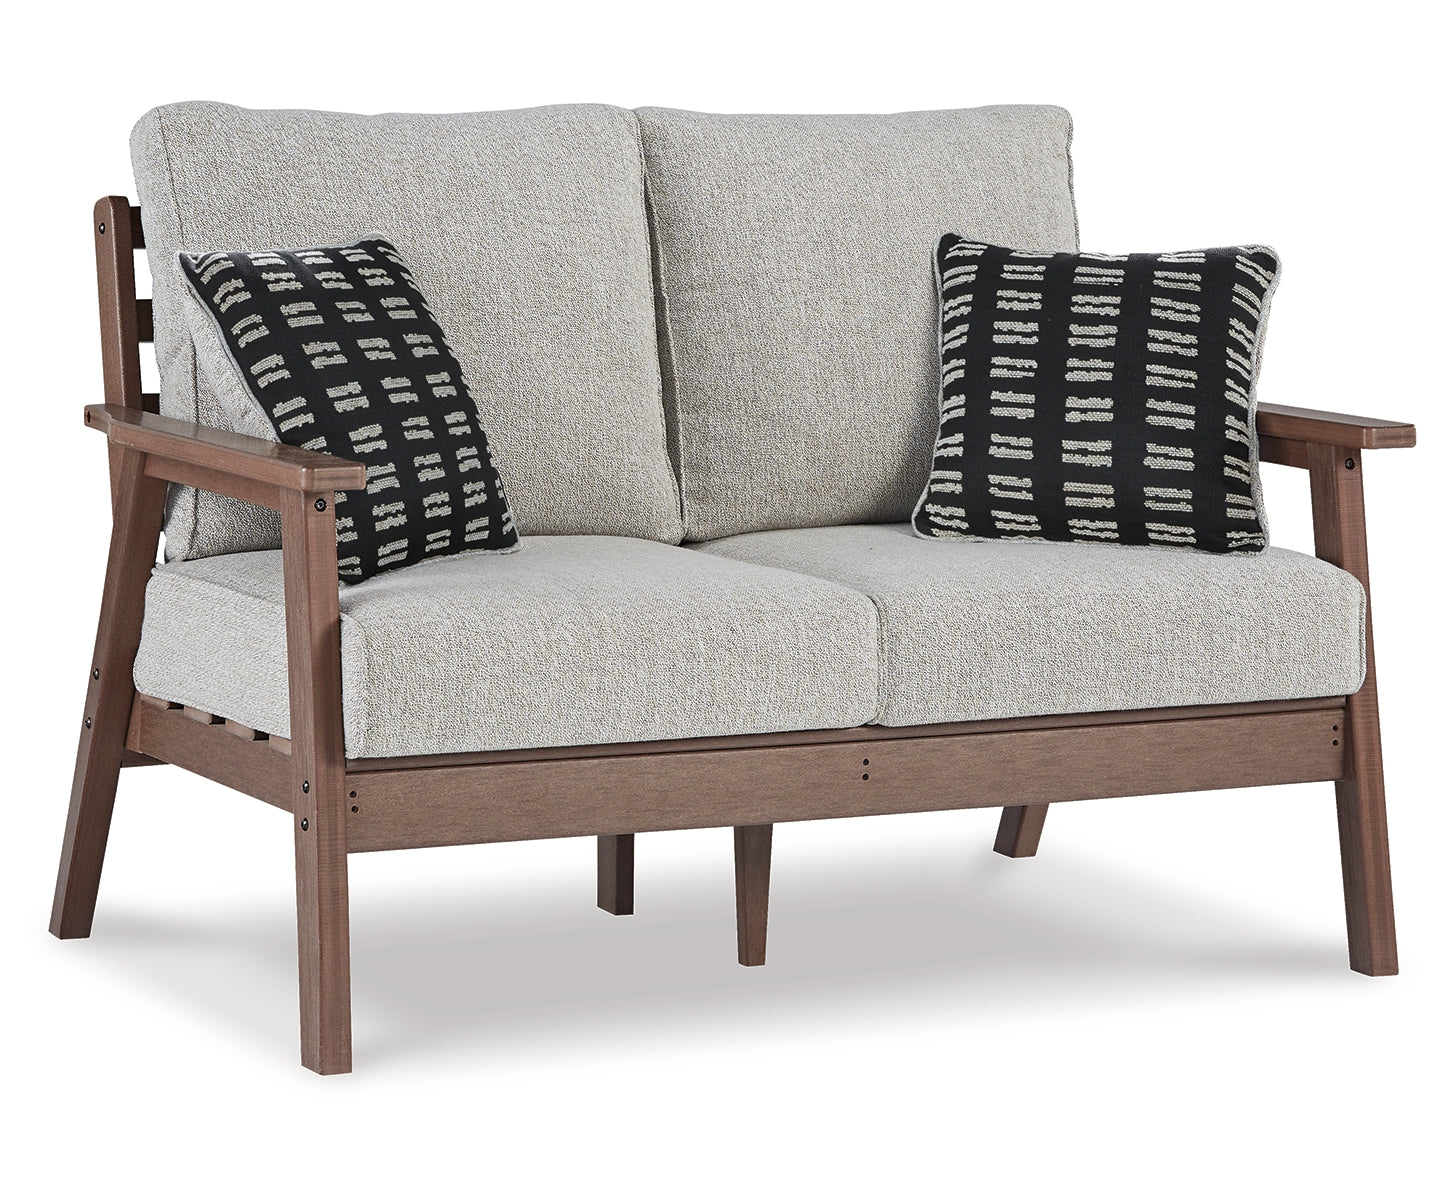 Emmeline Outdoor Loveseat and 2 Chairs with Coffee Table